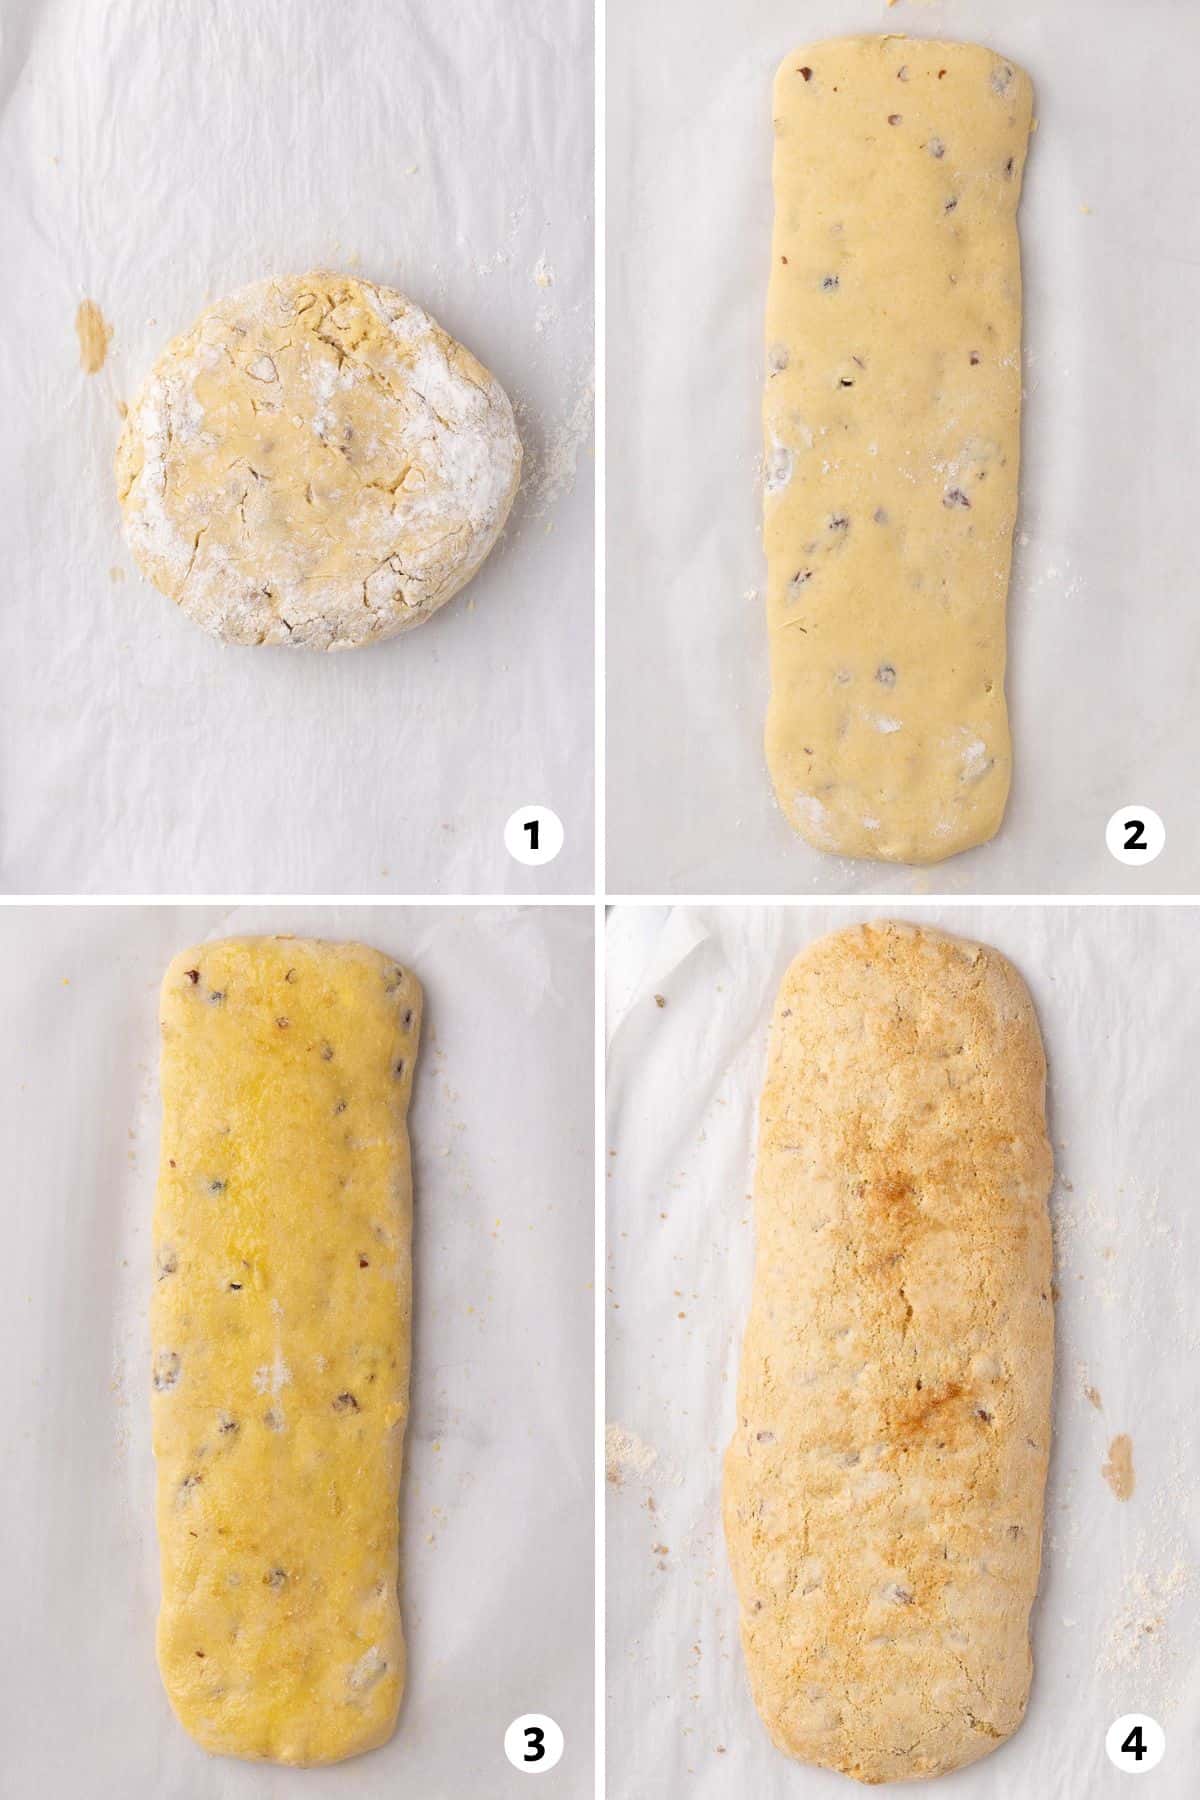 4 image collage shaping and baking dough: 1- chilled dough on a parchment lined baking sheet, 2- after shaping into a long, wide log, 3- after brushing with egg white and sugar, 4- after baking.